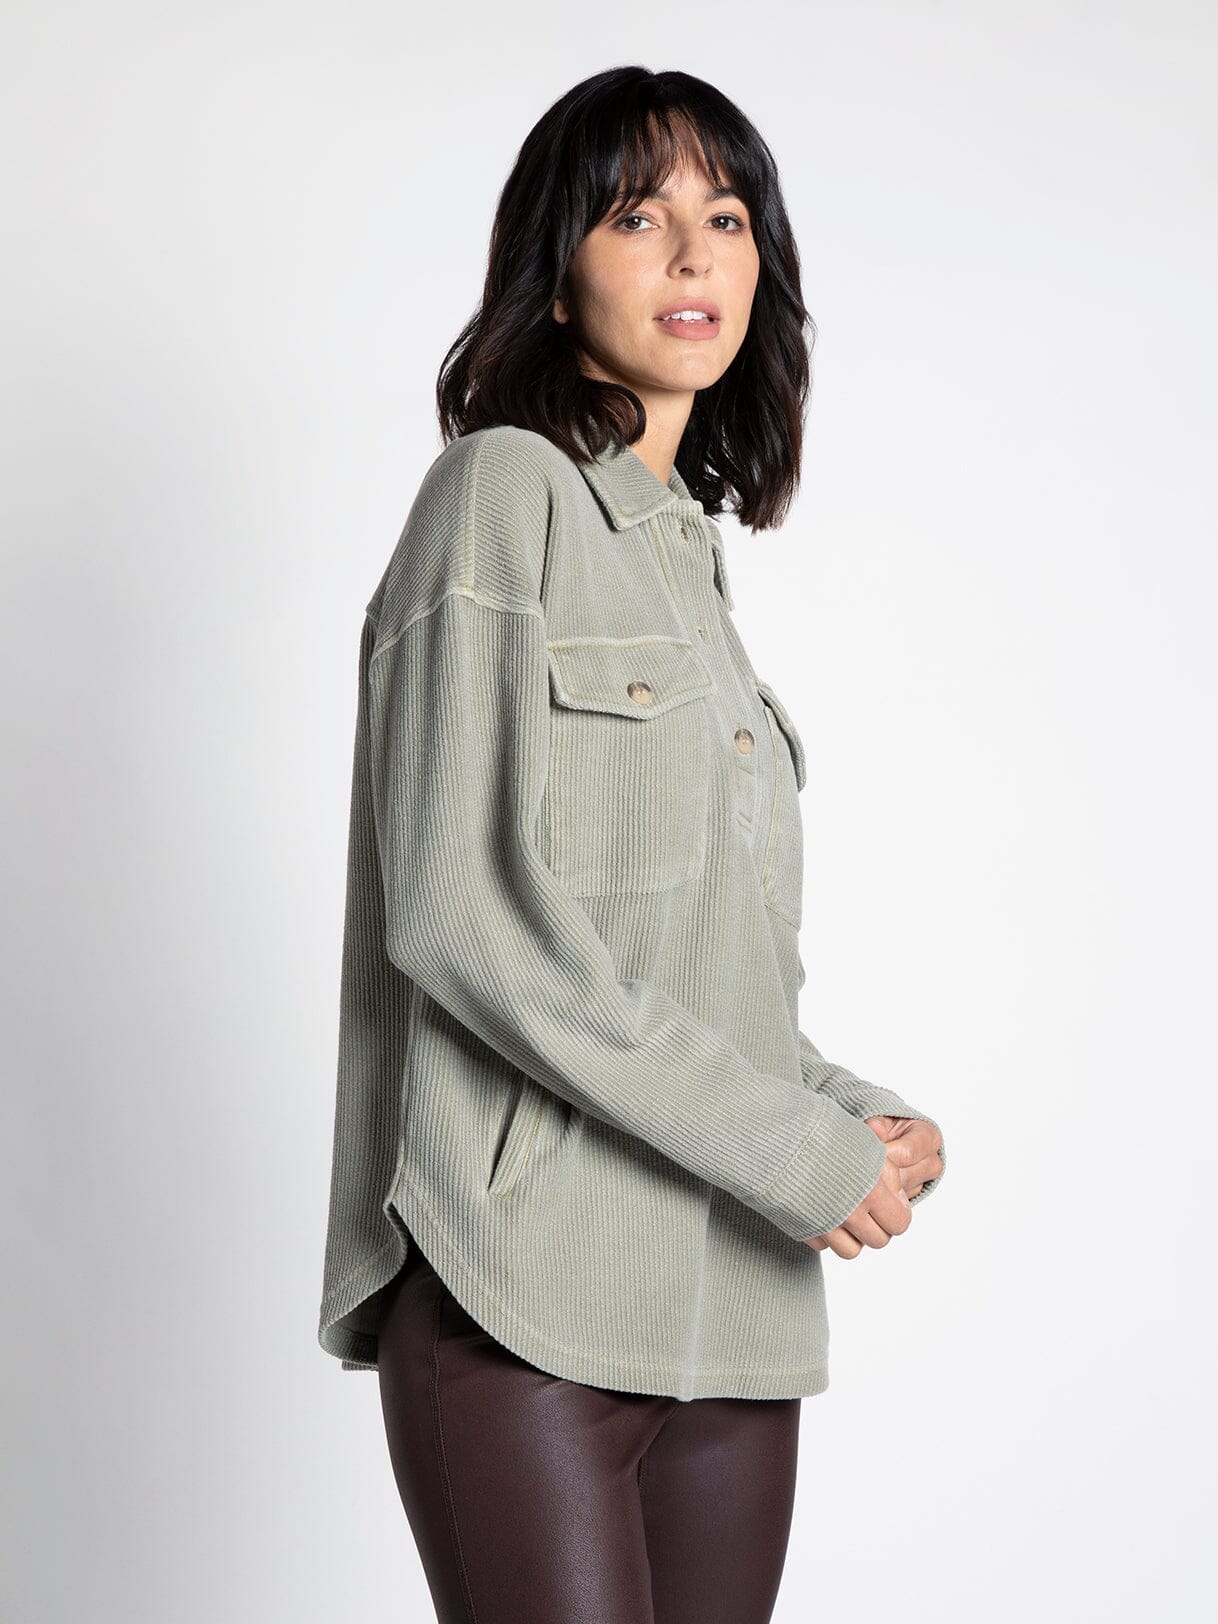 INGRIS TOP by Thread and Supply in OLIVE